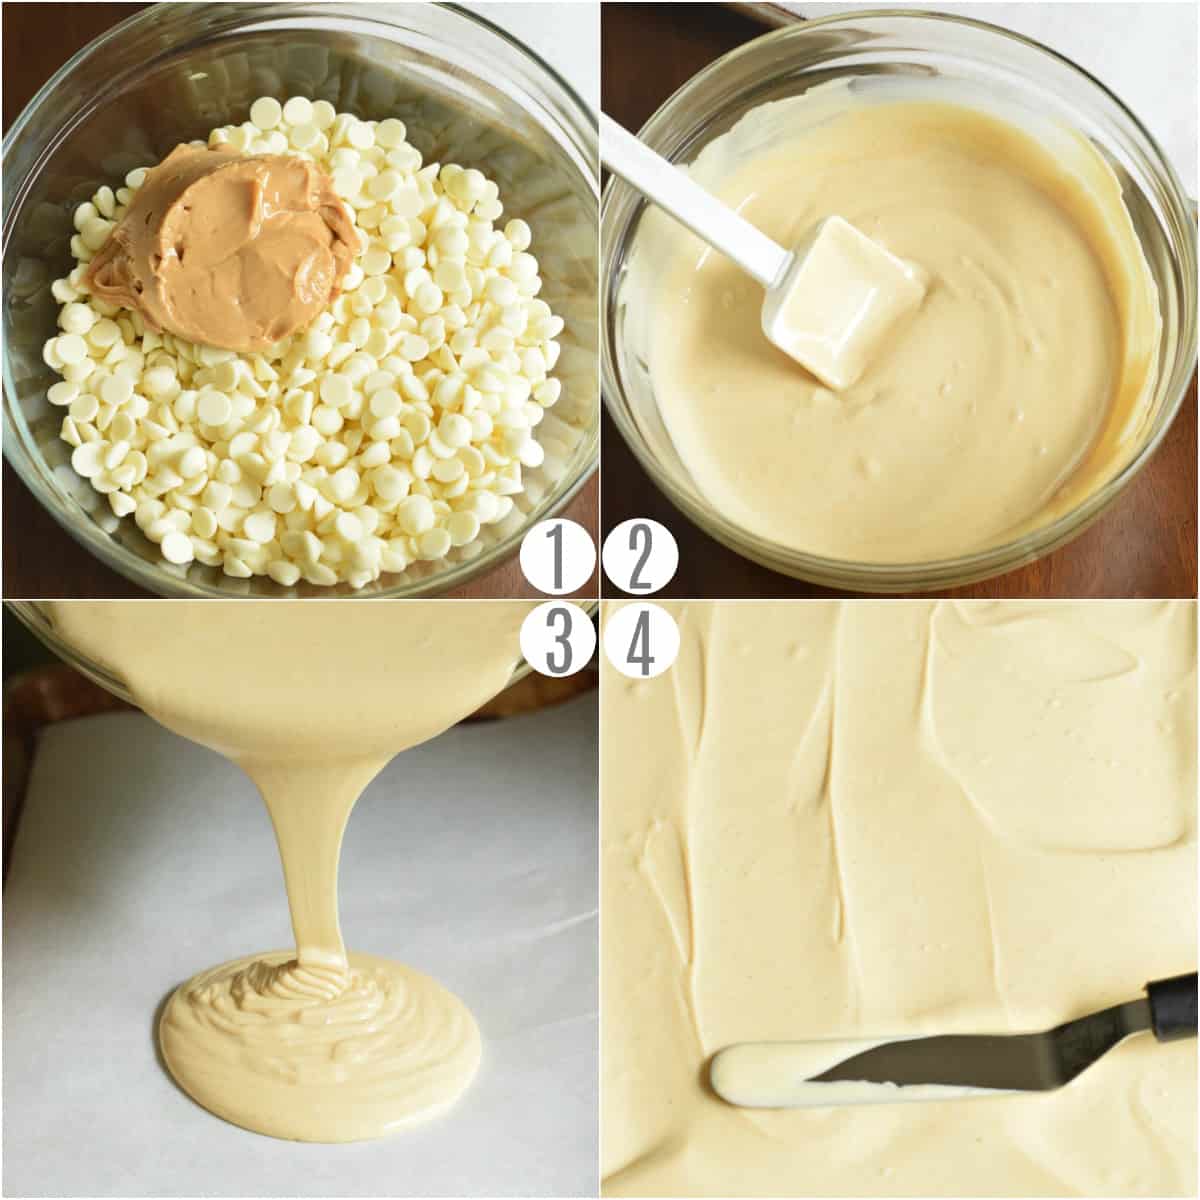 Step by step photo showing how to make tiger butter fudge.